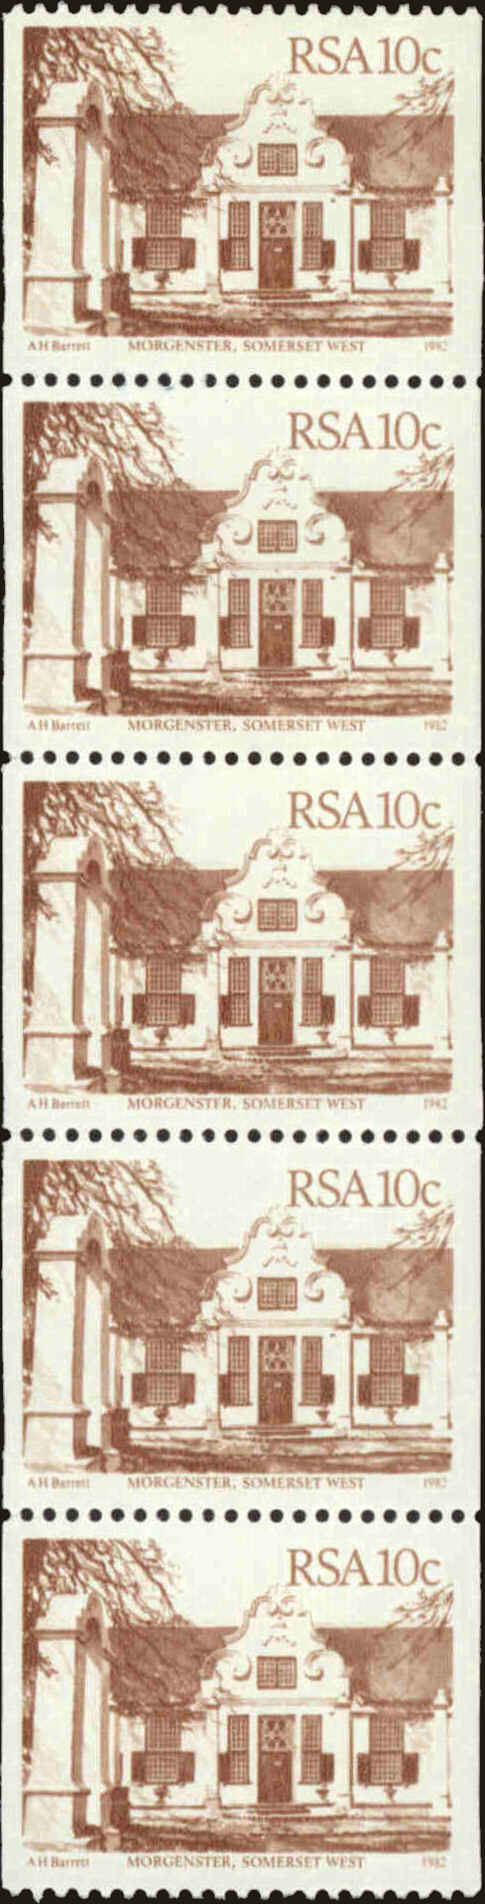 Front view of South Africa 605 collectors stamp